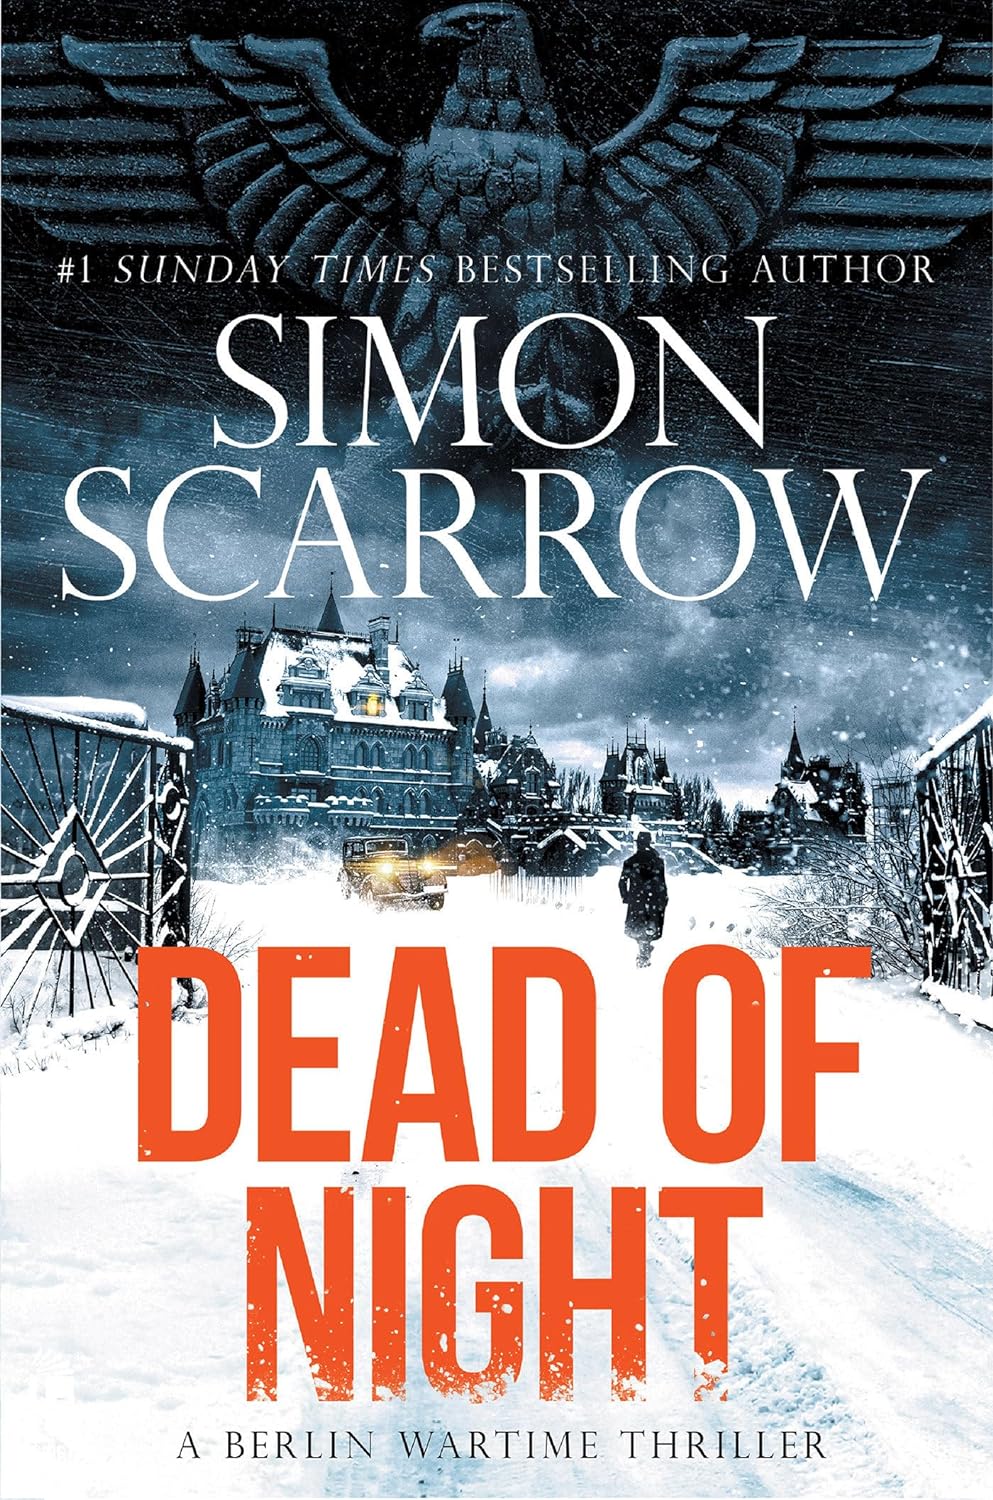 Image for "Dead of Night"